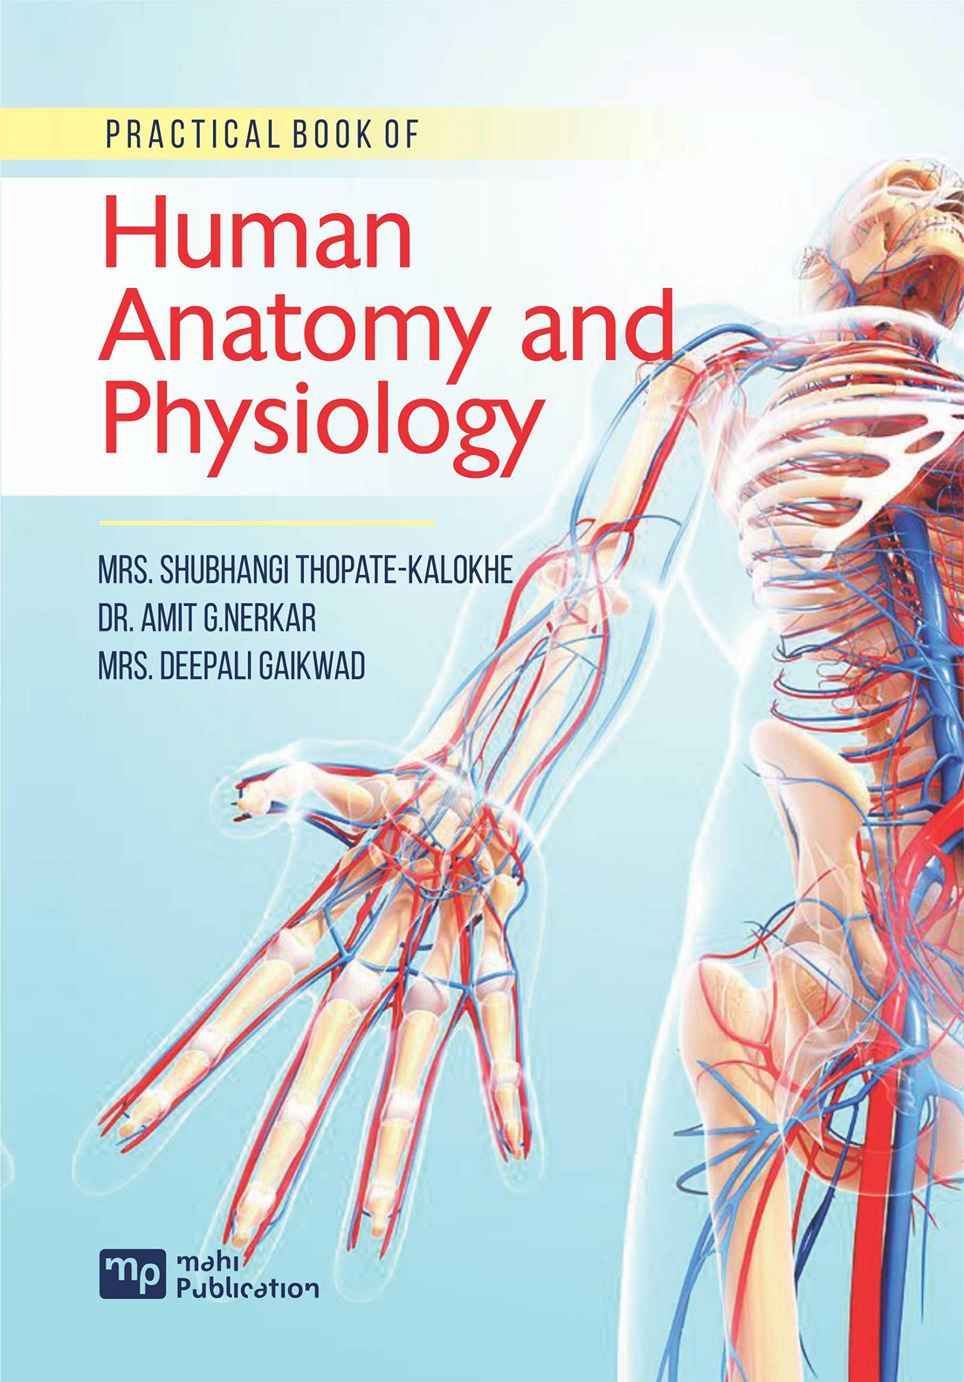 Practical Book of Human Anatomy and Physiology